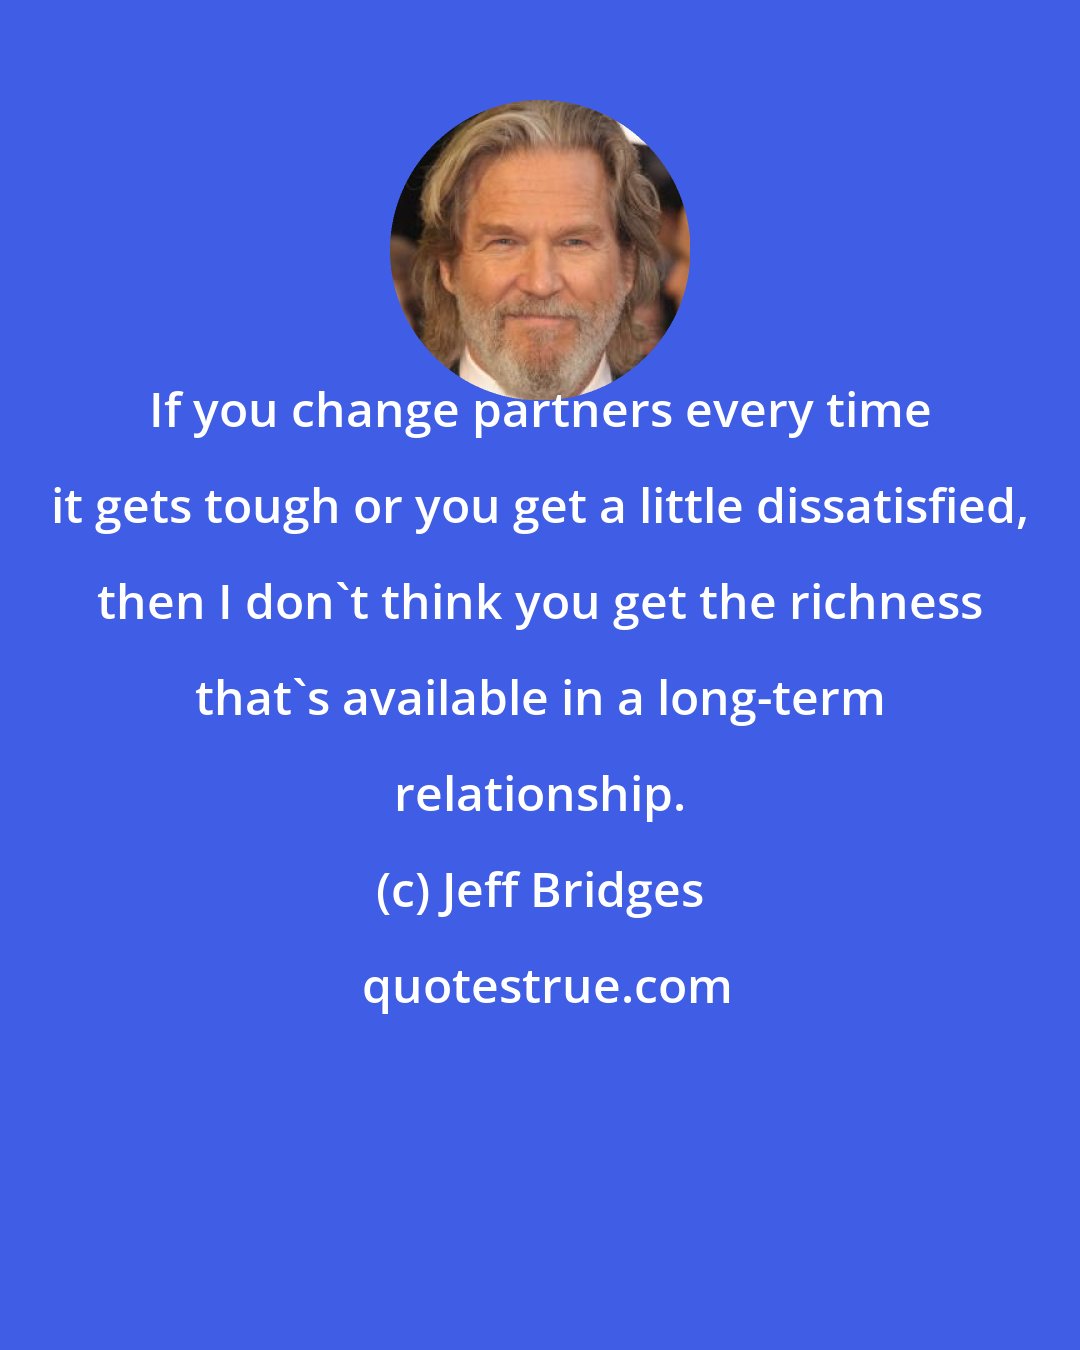 Jeff Bridges: If you change partners every time it gets tough or you get a little dissatisfied, then I don't think you get the richness that's available in a long-term relationship.